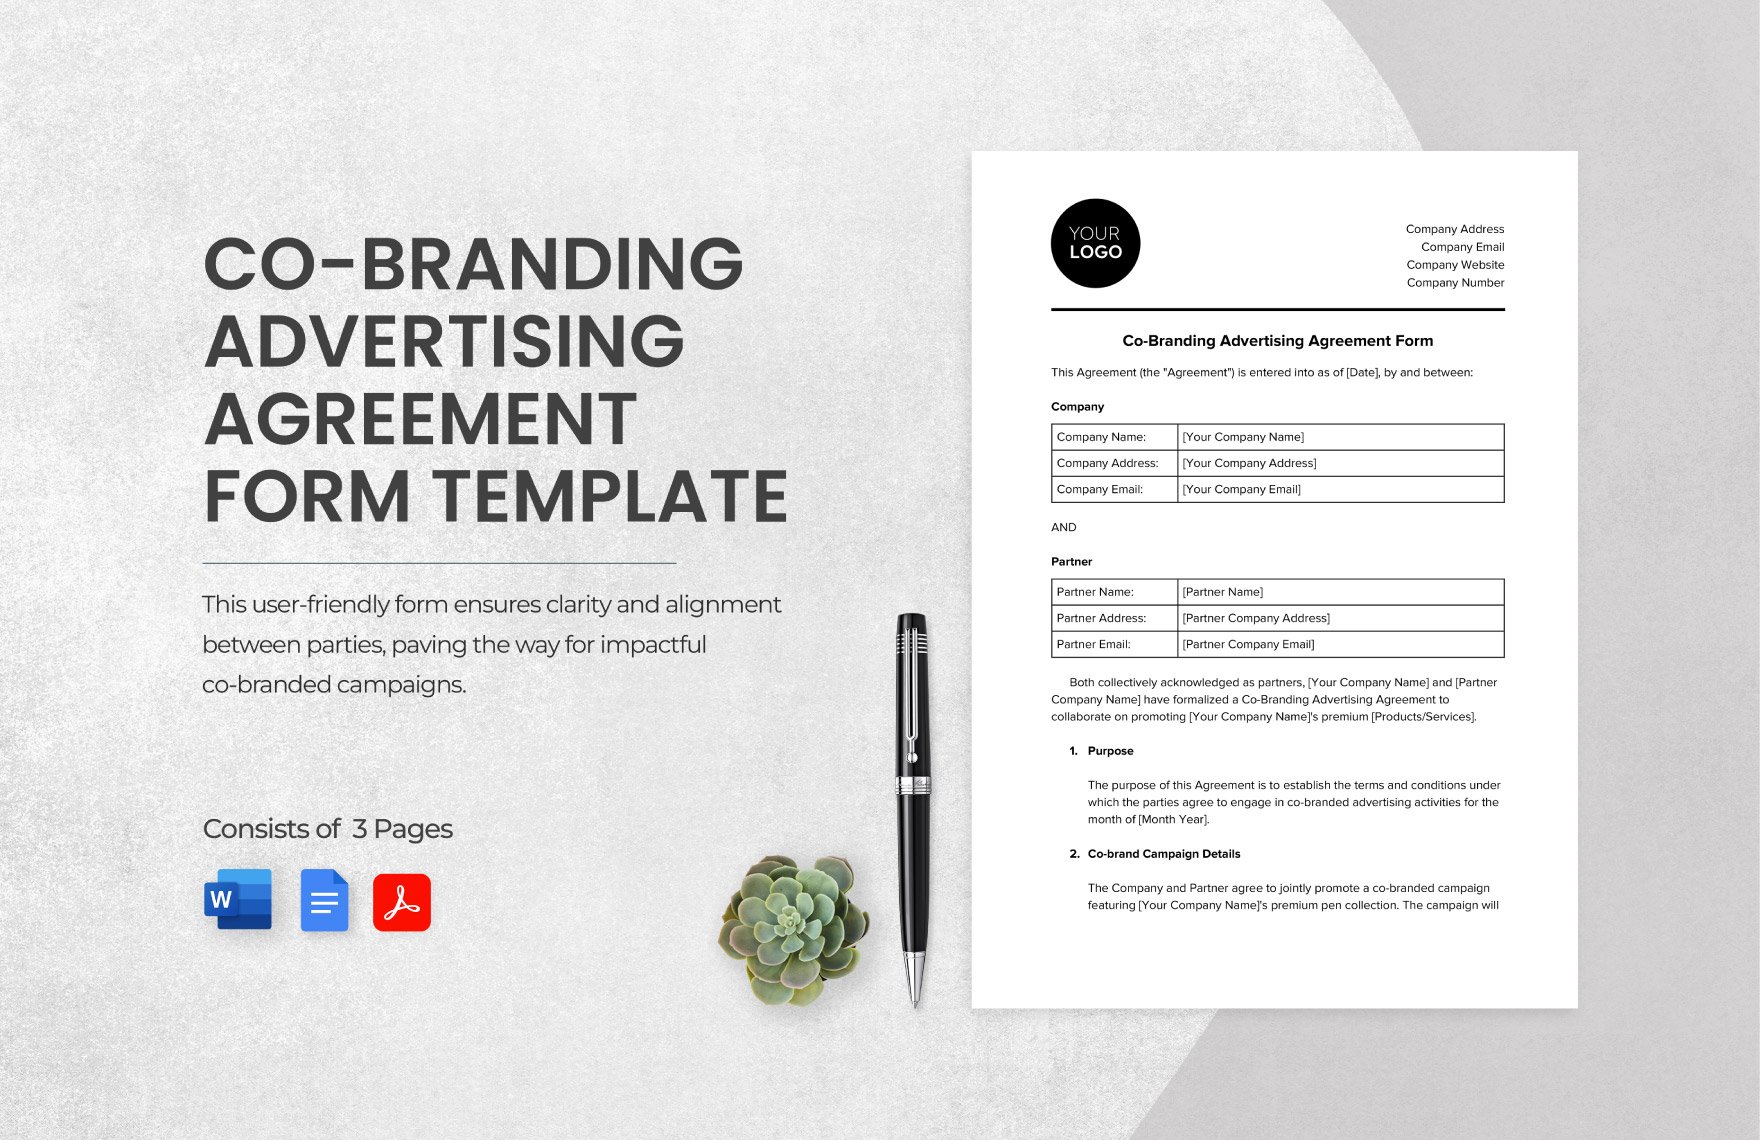 Co-Branding Advertising Agreement Form Template in Word, Google Docs, PDF